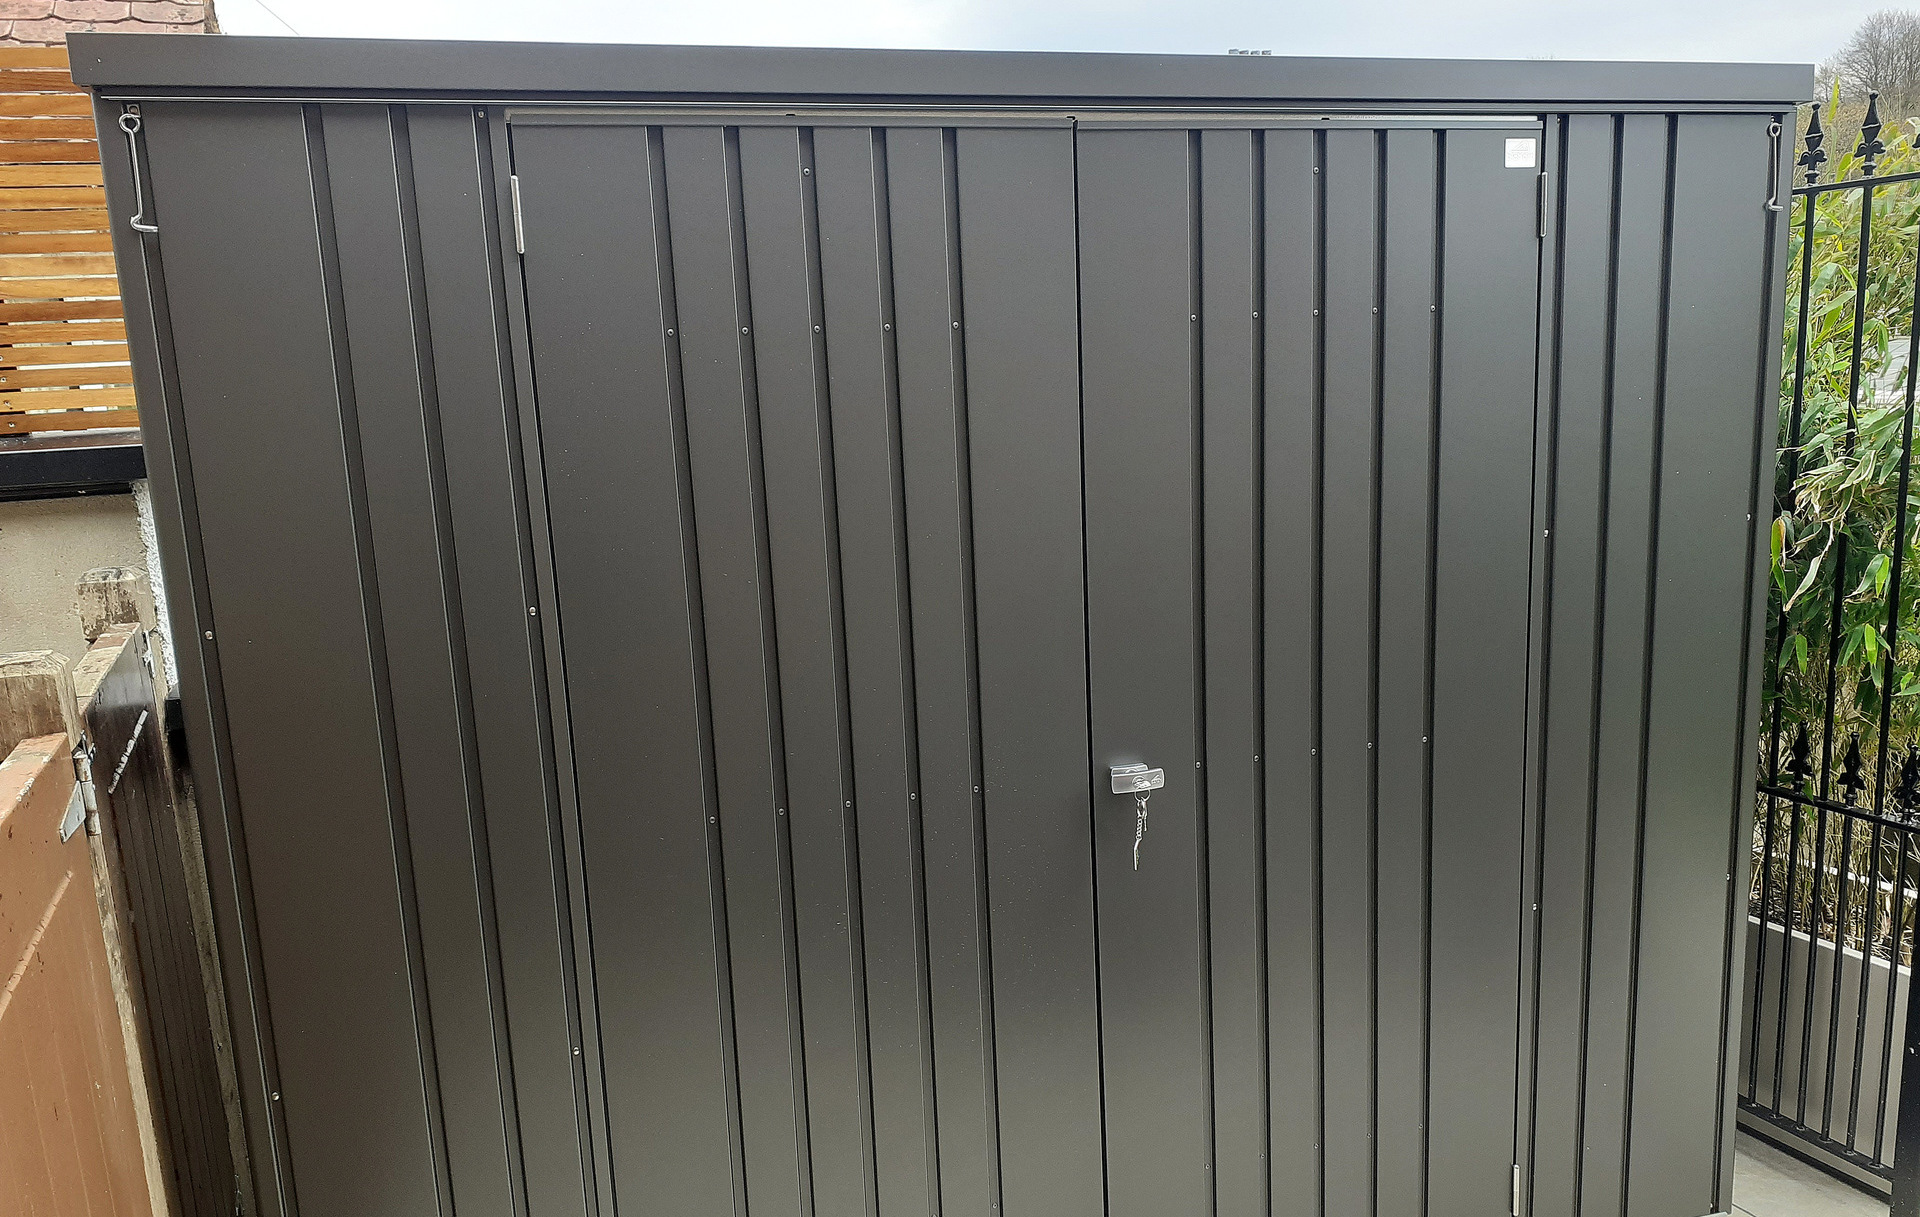 The superb quality and style of the Biohort Equipment Locker 230 in metallic dark grey  | supplied + installed in Belfast, Northern Ireland by Owen Chubb Landscapers. Authorised Biohort Dealer and Biohort Certified Installation Partner. Tel 087-2306 128.